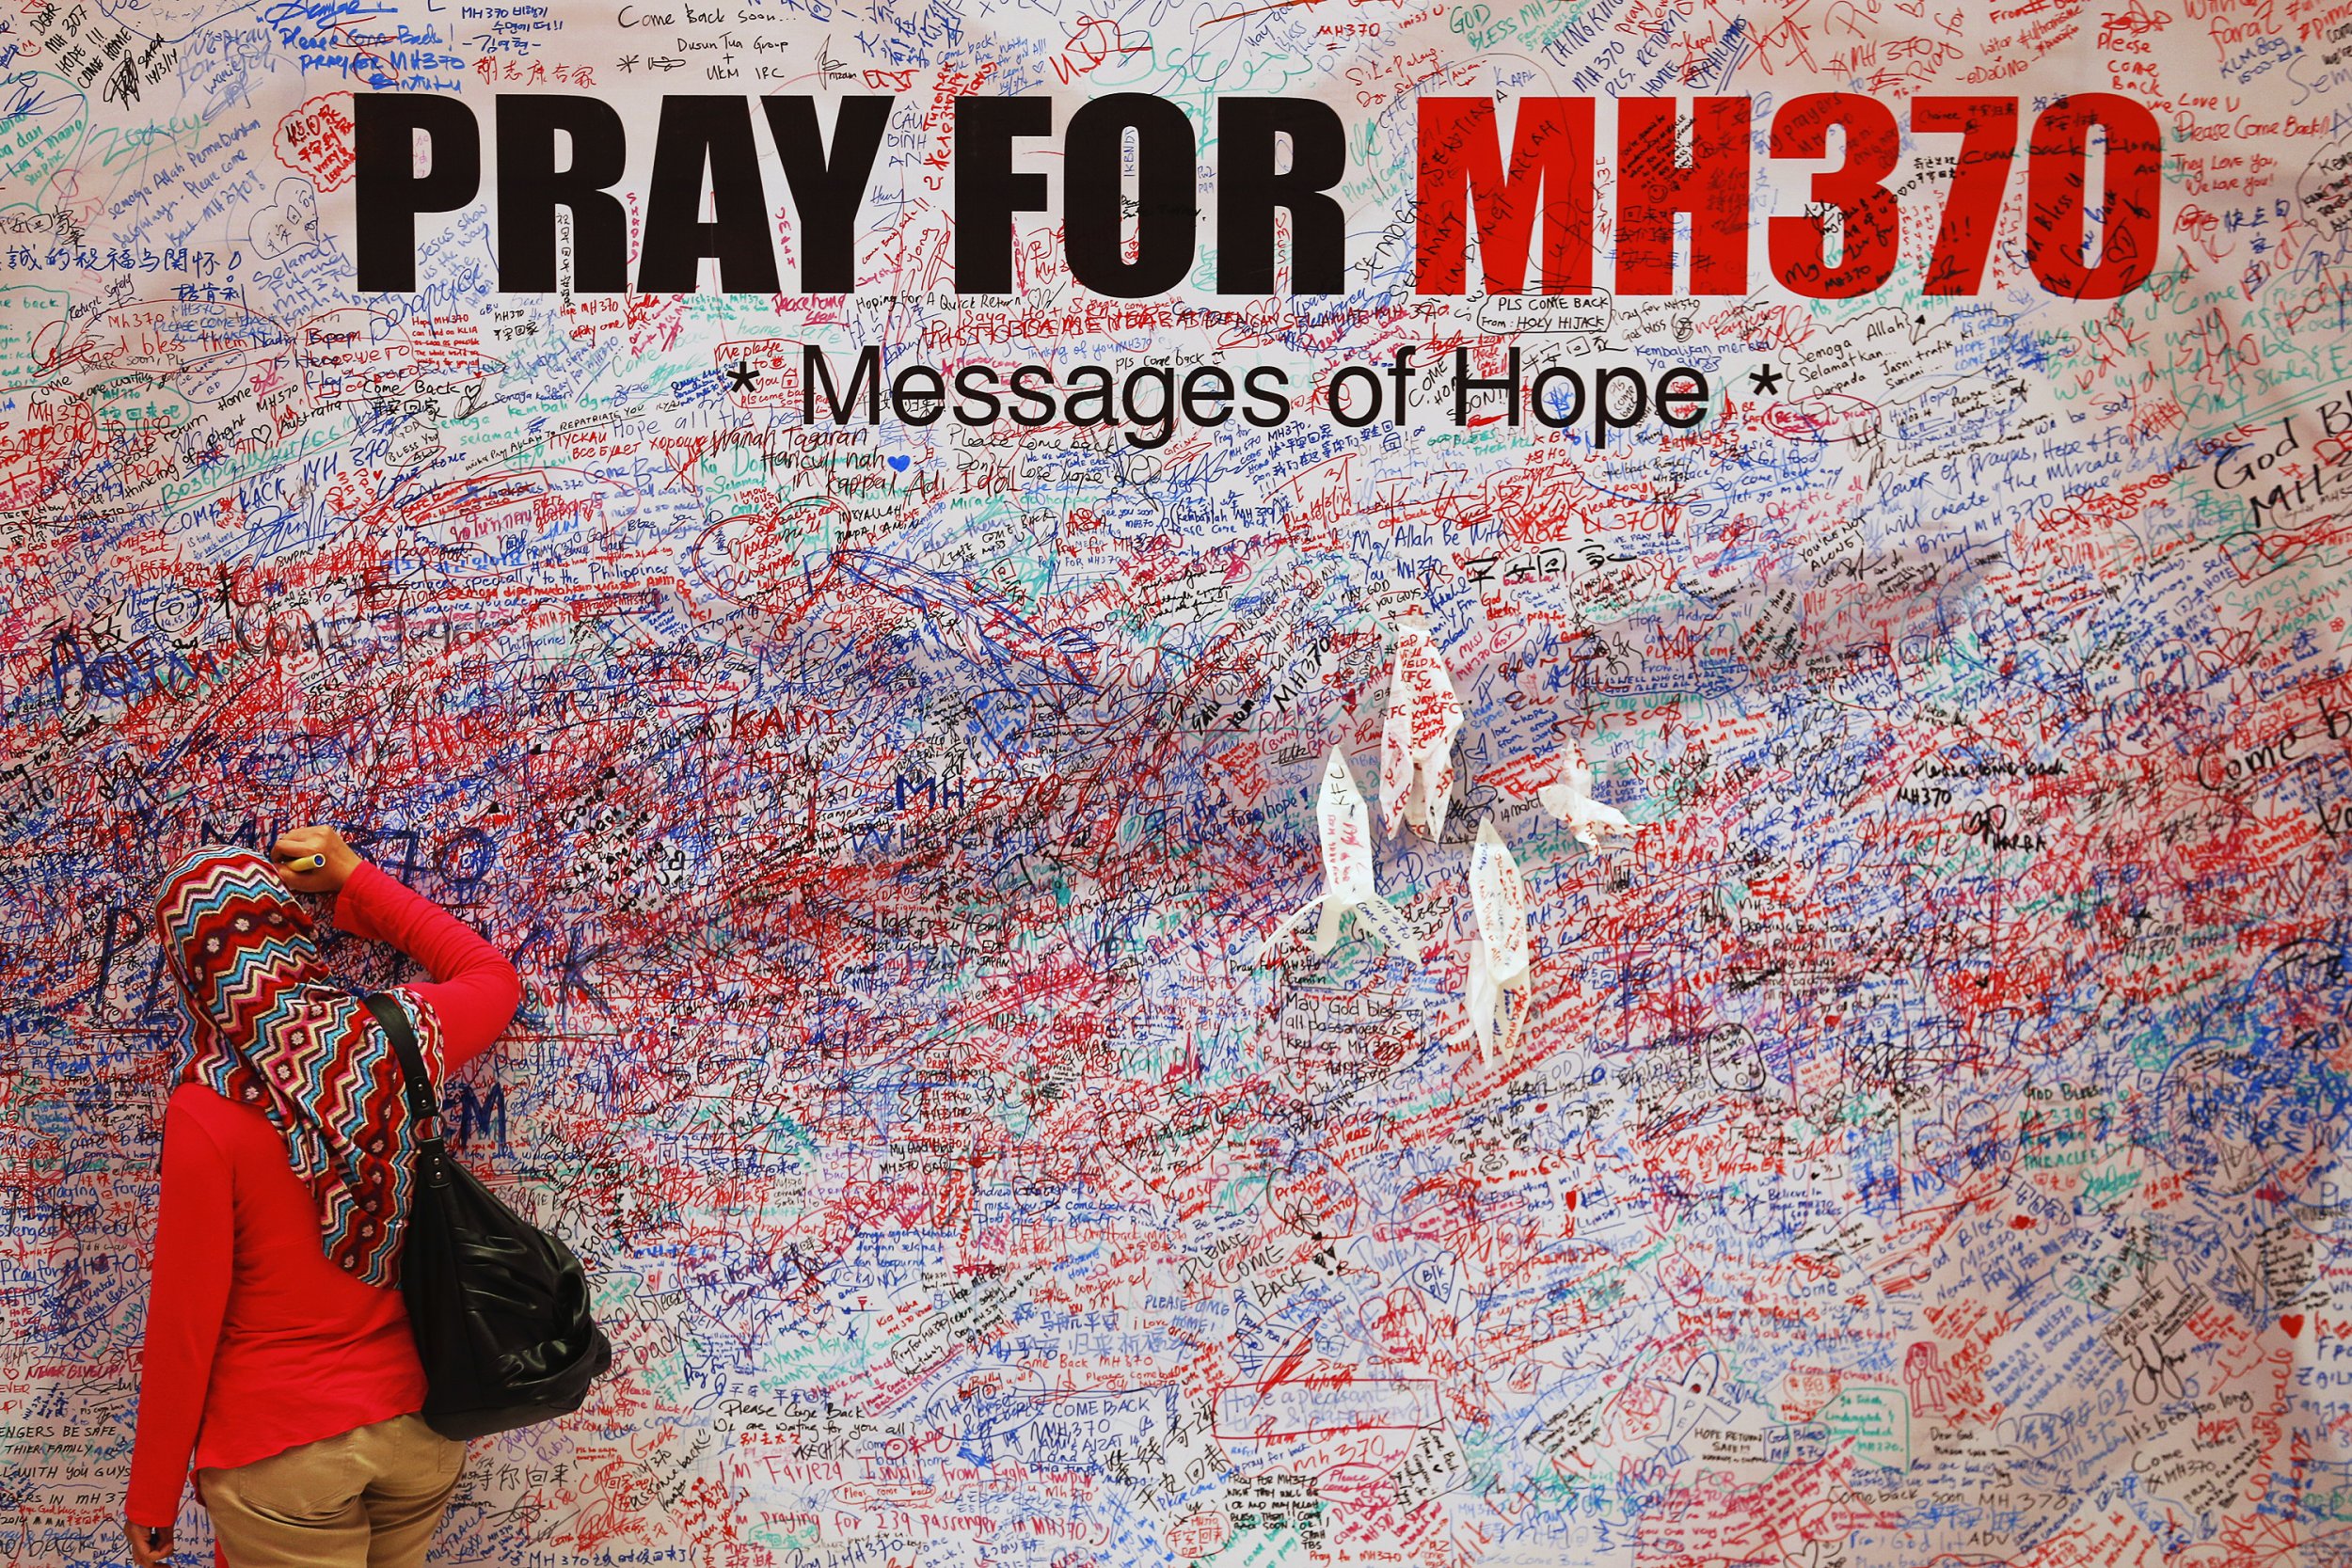 MH370: New Clue Reveals Missing Malaysia Airlines Flight Turned South